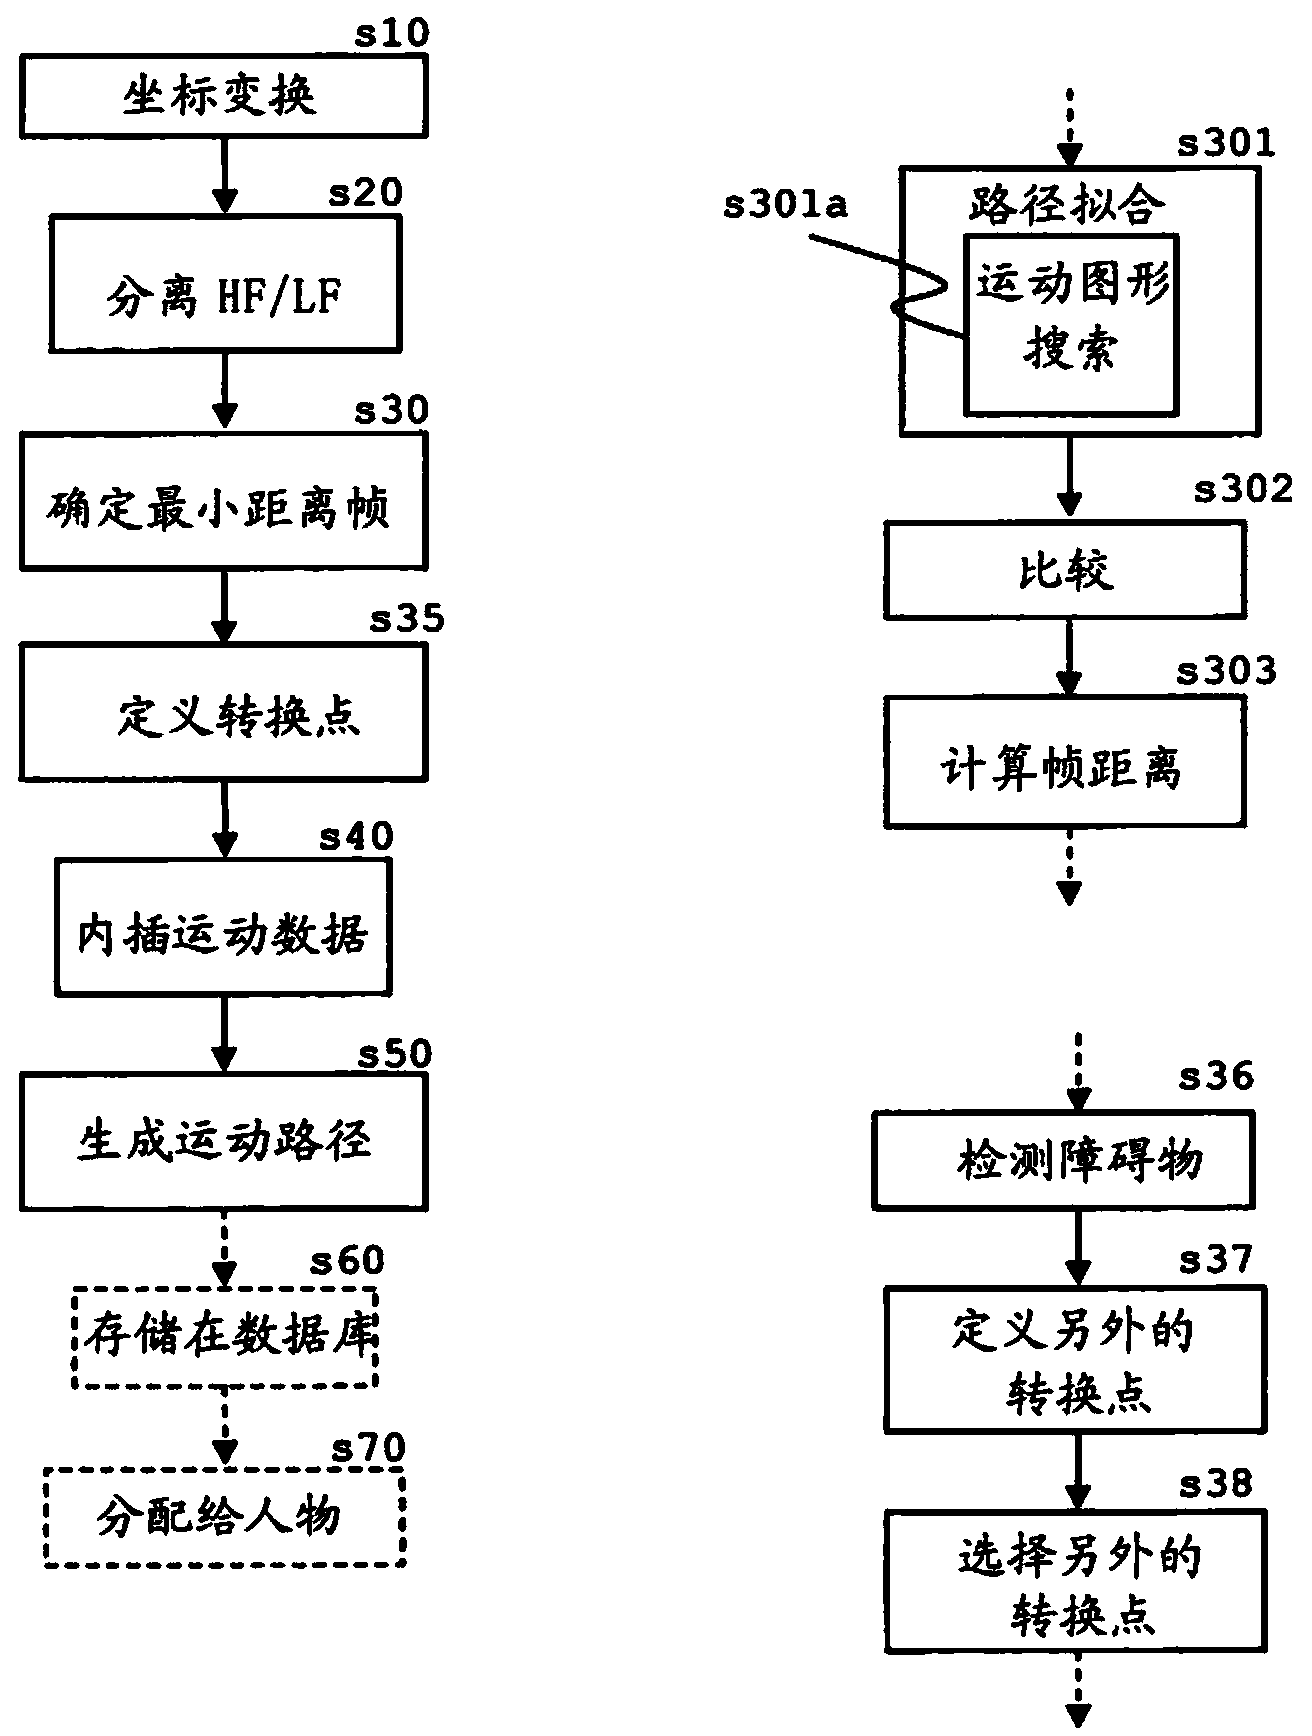 Method for generating motion synthesis data and device for generating motion synthesis data